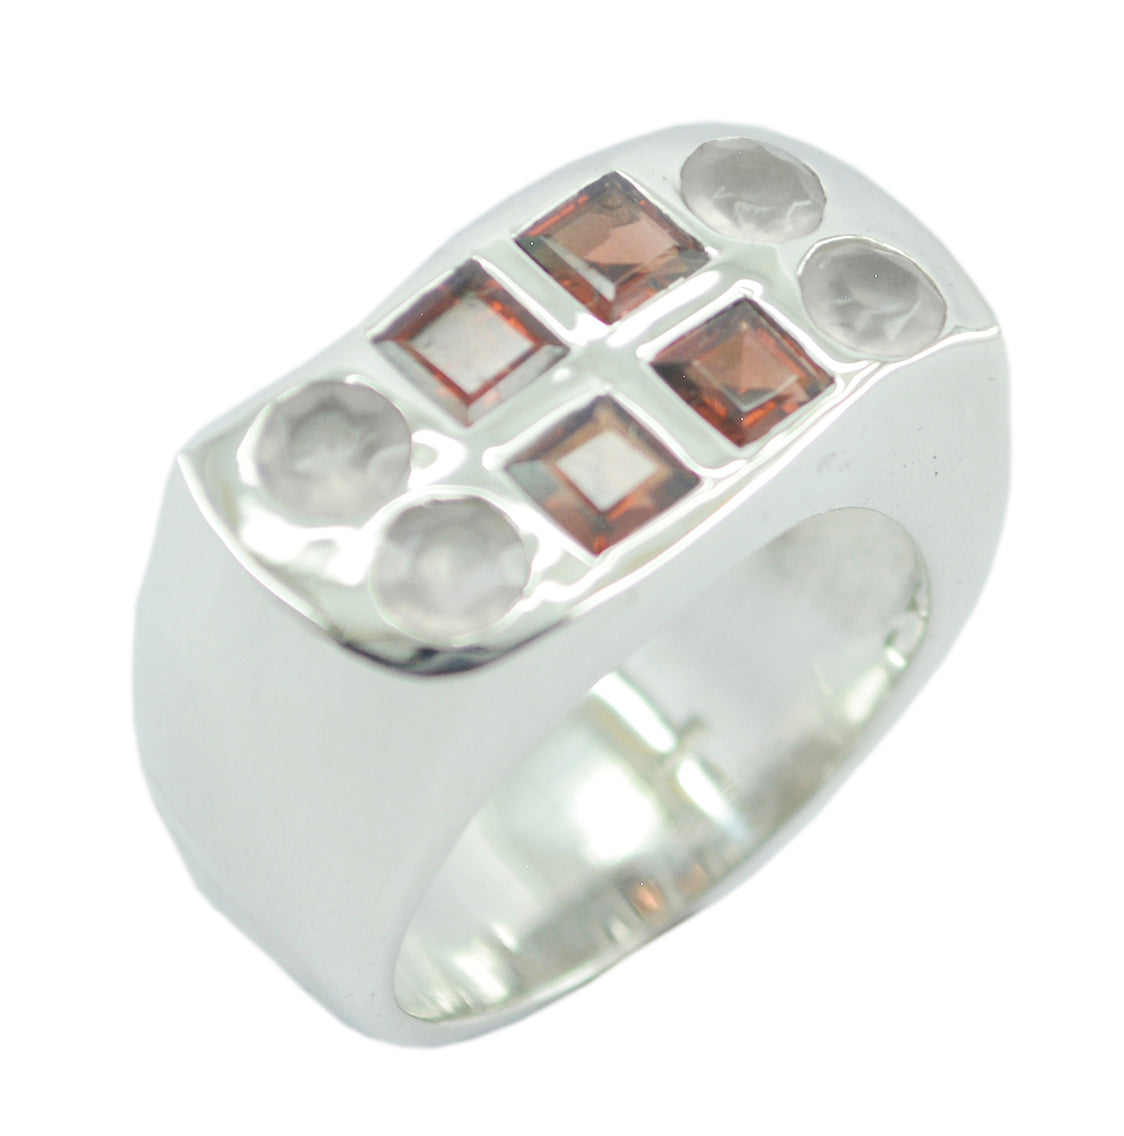 Comely Gemstones Multi Stone Sterling Silver Rings Best Selling Shop